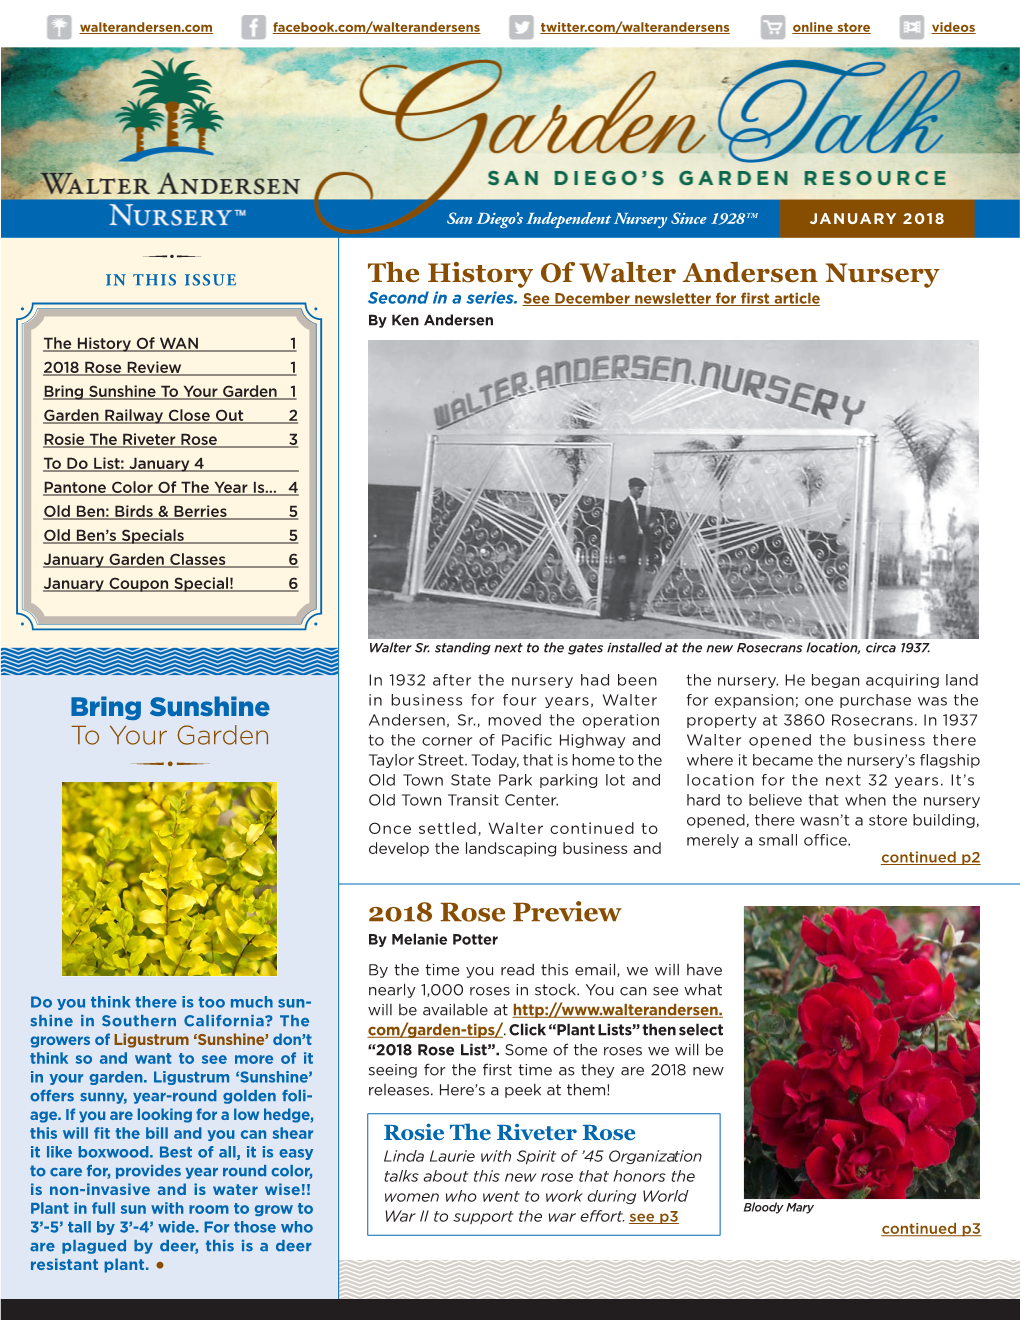 The History of Walter Andersen Nursery Bring Sunshine to Your Garden 2018 Rose Preview